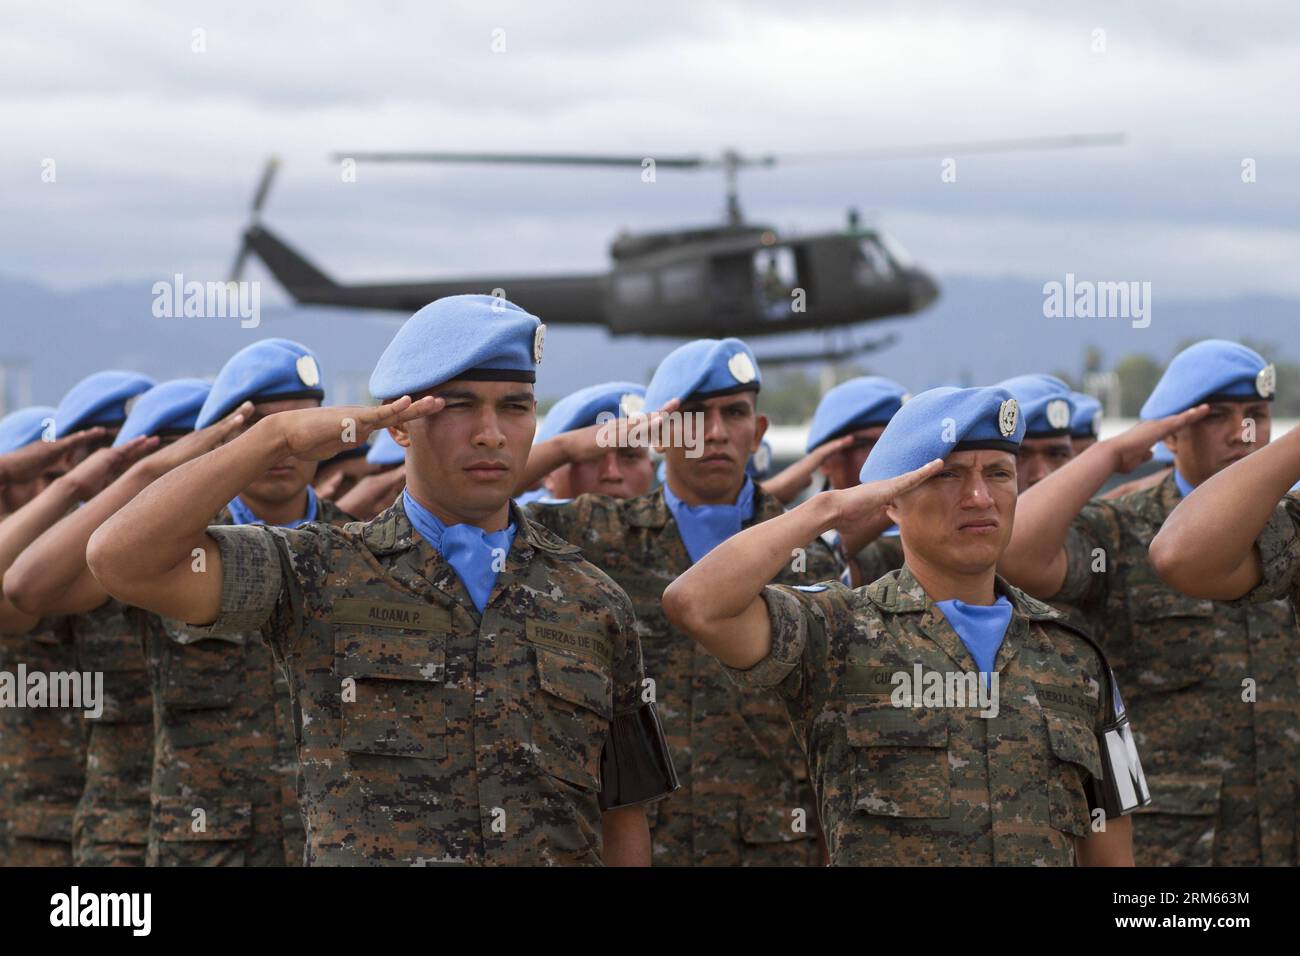 Bildnummer: 60815794  Datum: 10.12.2013  Copyright: imago/Xinhua     GUATEMALA CITY,  -- Soldiers of the United Nations Stabilization Mission in Haiti (MINUSTAH) of Guatemalan Army participate in a parade to commemorate the 92nd anniversary of the Guatemalan Air Force, in Guatemala City, capital of Guatemala, on Dec. 10, 2013. (Xinhua/Luis Echeverria) (rt) (ah) GUATEMALA-GUATEMALA CITY-MILITARY-CELEBRATION PUBLICATIONxNOTxINxCHN Militär Soldat xas x0x 2013 quer premiumd Stock Photo